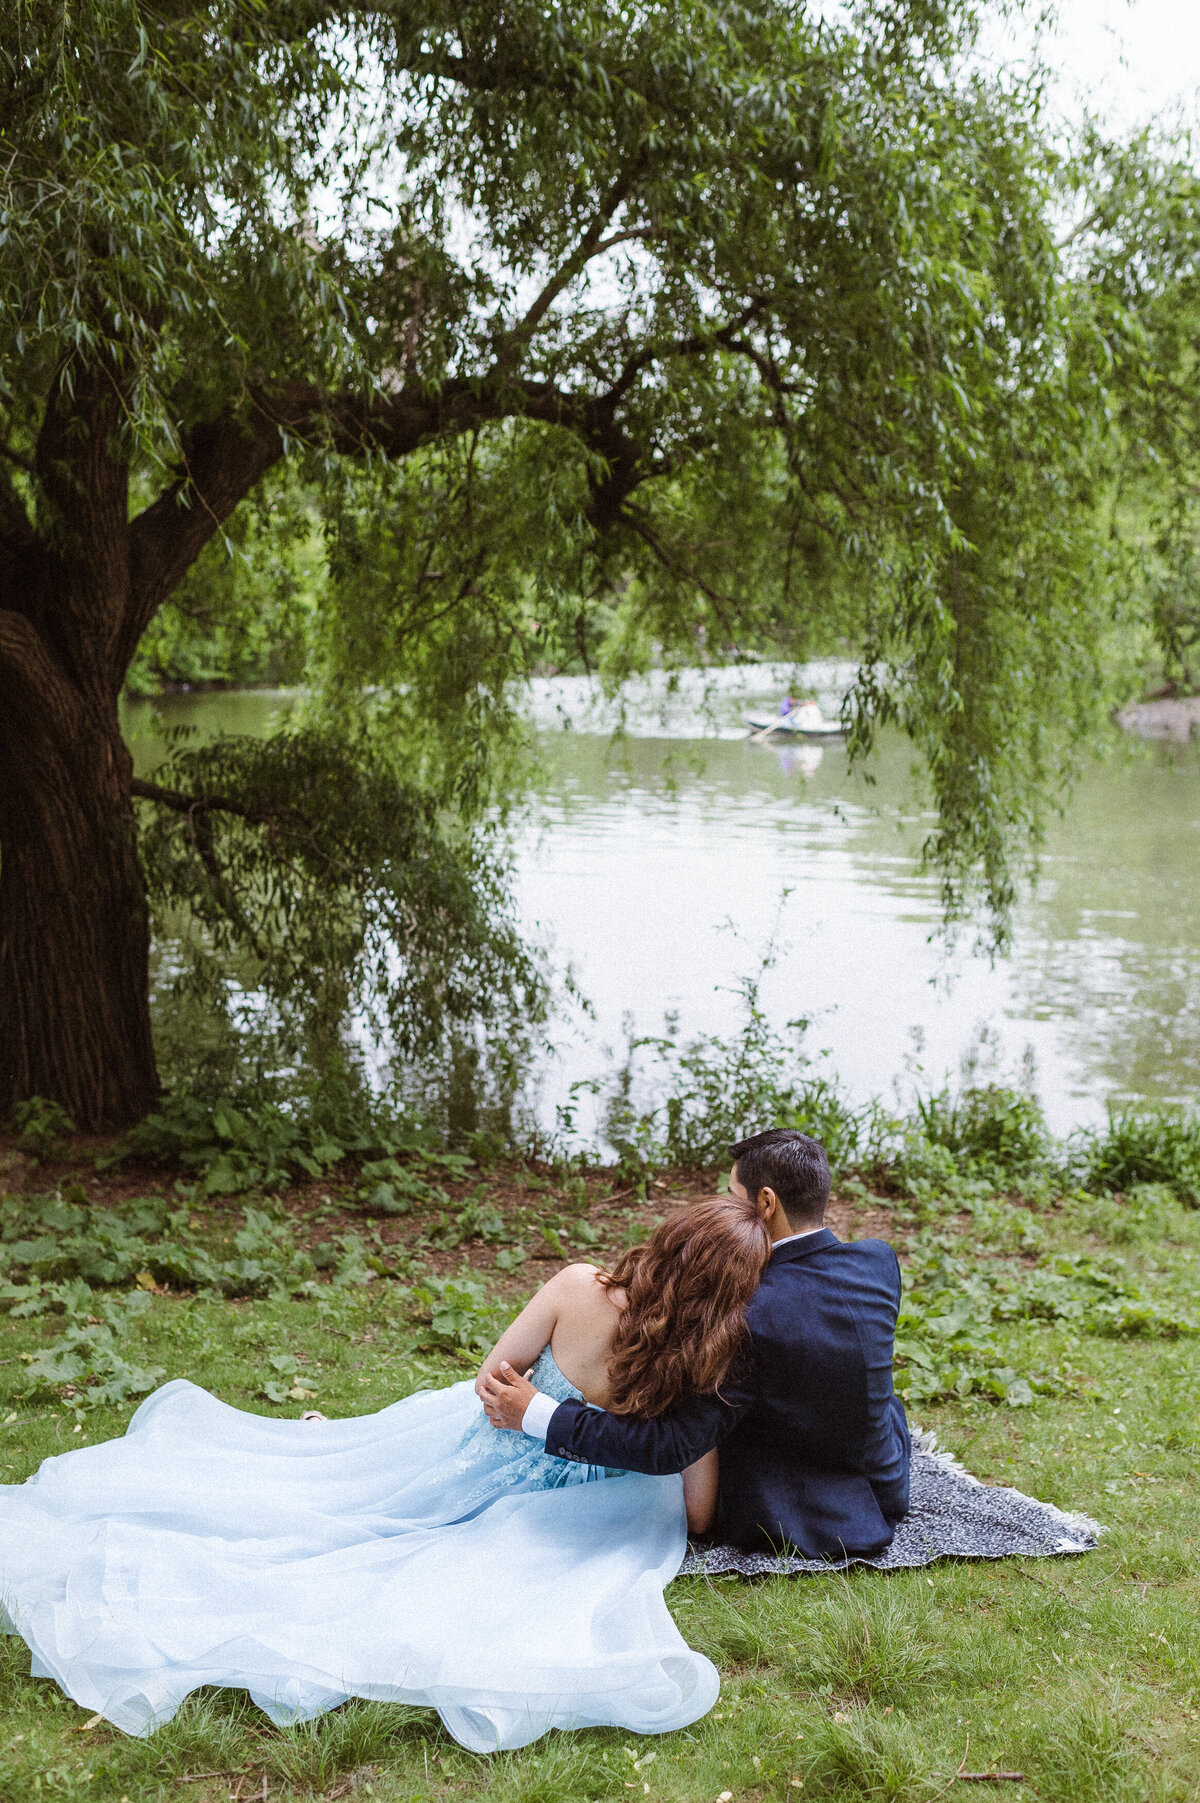 central-park-spring-engagement-photos-by-suess-moments-nj-wedding-photographer (5 of 50)